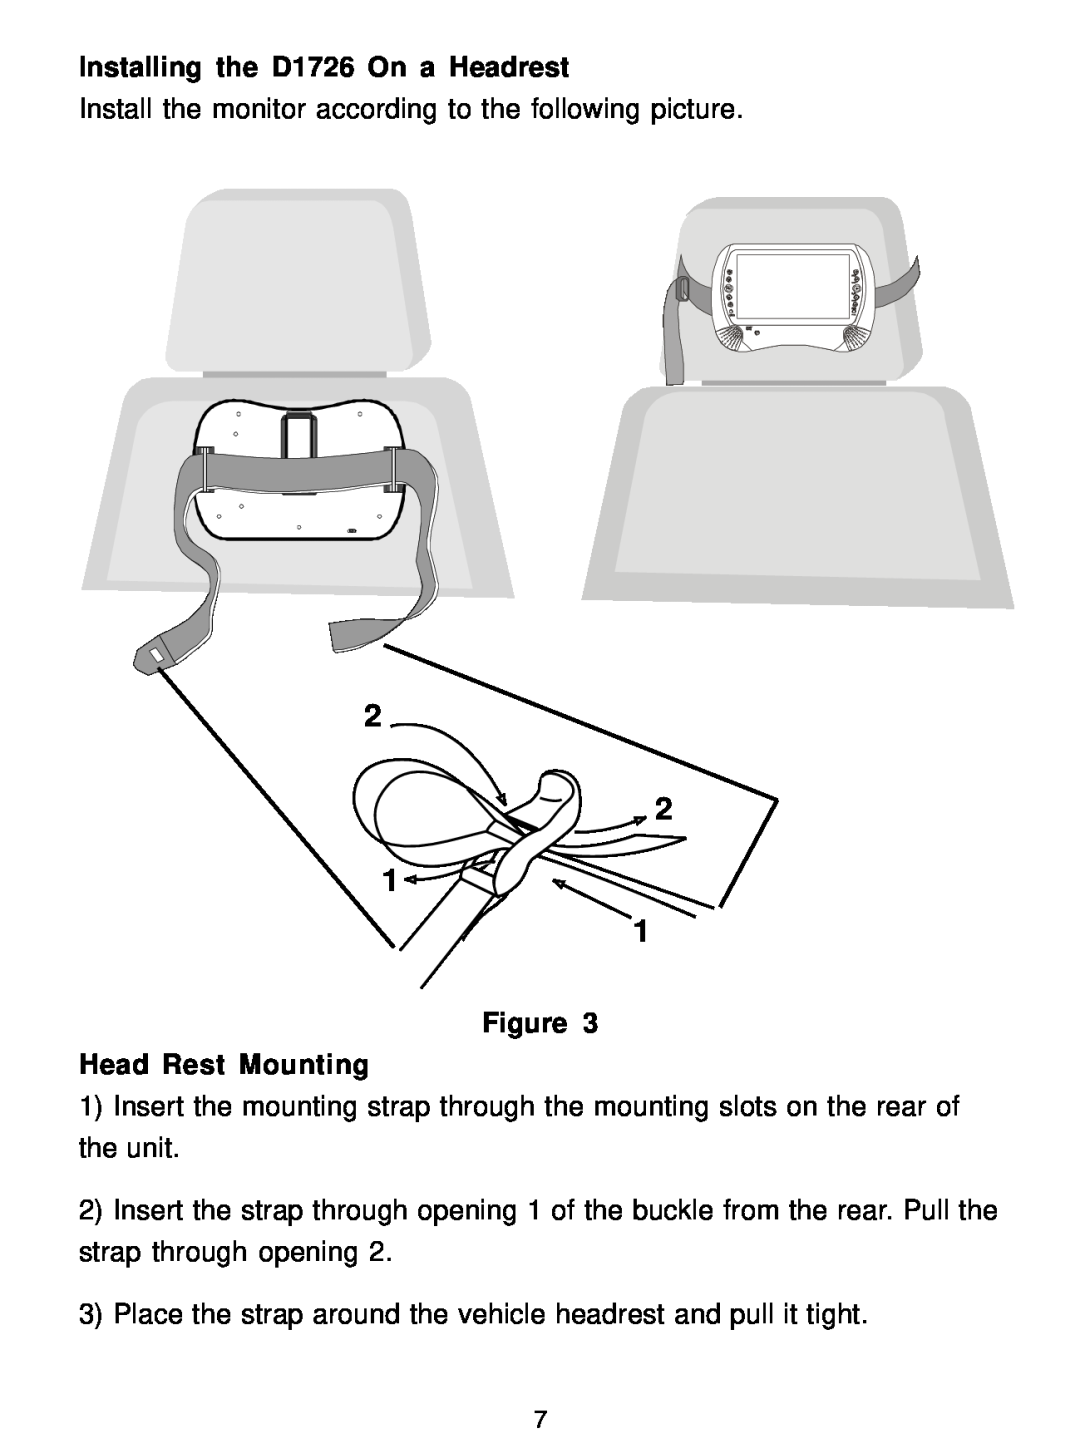 Audiovox Installing the D1726 On a Headrest, Install the monitor according to the following picture, Head Rest Mounting 